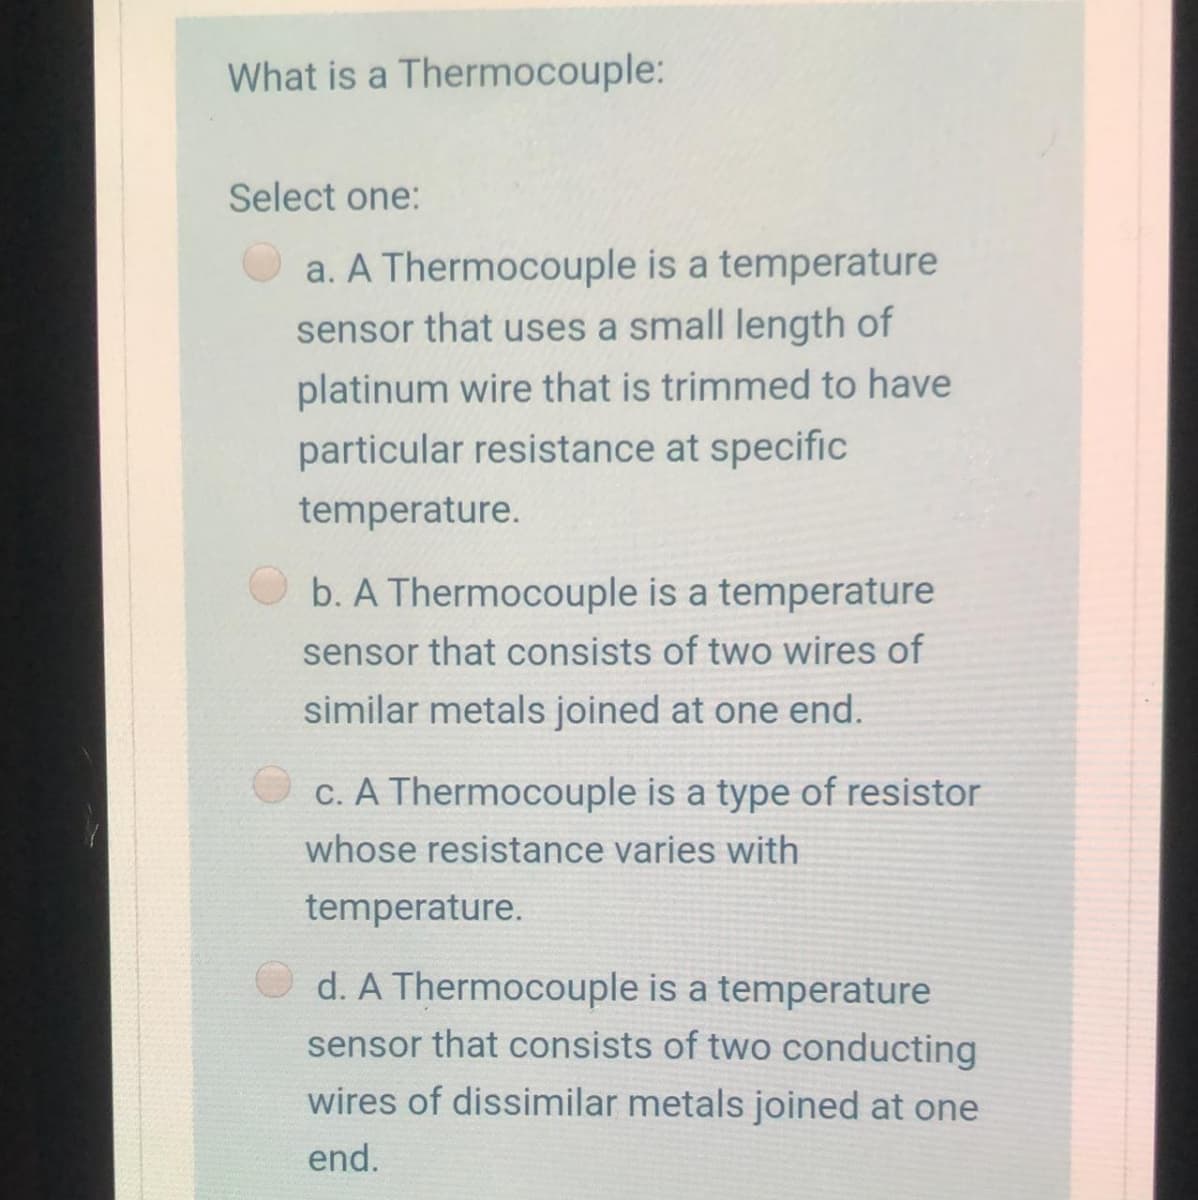 What is a Thermocouple:
Select one:
a. A Thermocouple is a temperature
sensor that uses a small length of
platinum wire that is trimmed to have
particular resistance at specific
temperature.
b. A Thermocouple is a temperature
sensor that consists of two wires of
similar metals joined at one end.
C. A Thermocouple is a type of resistor
whose resistance varies with
temperature.
d. A Thermocouple is a temperature
sensor that consists of two conducting
wires of dissimilar metals joined at one
end.
